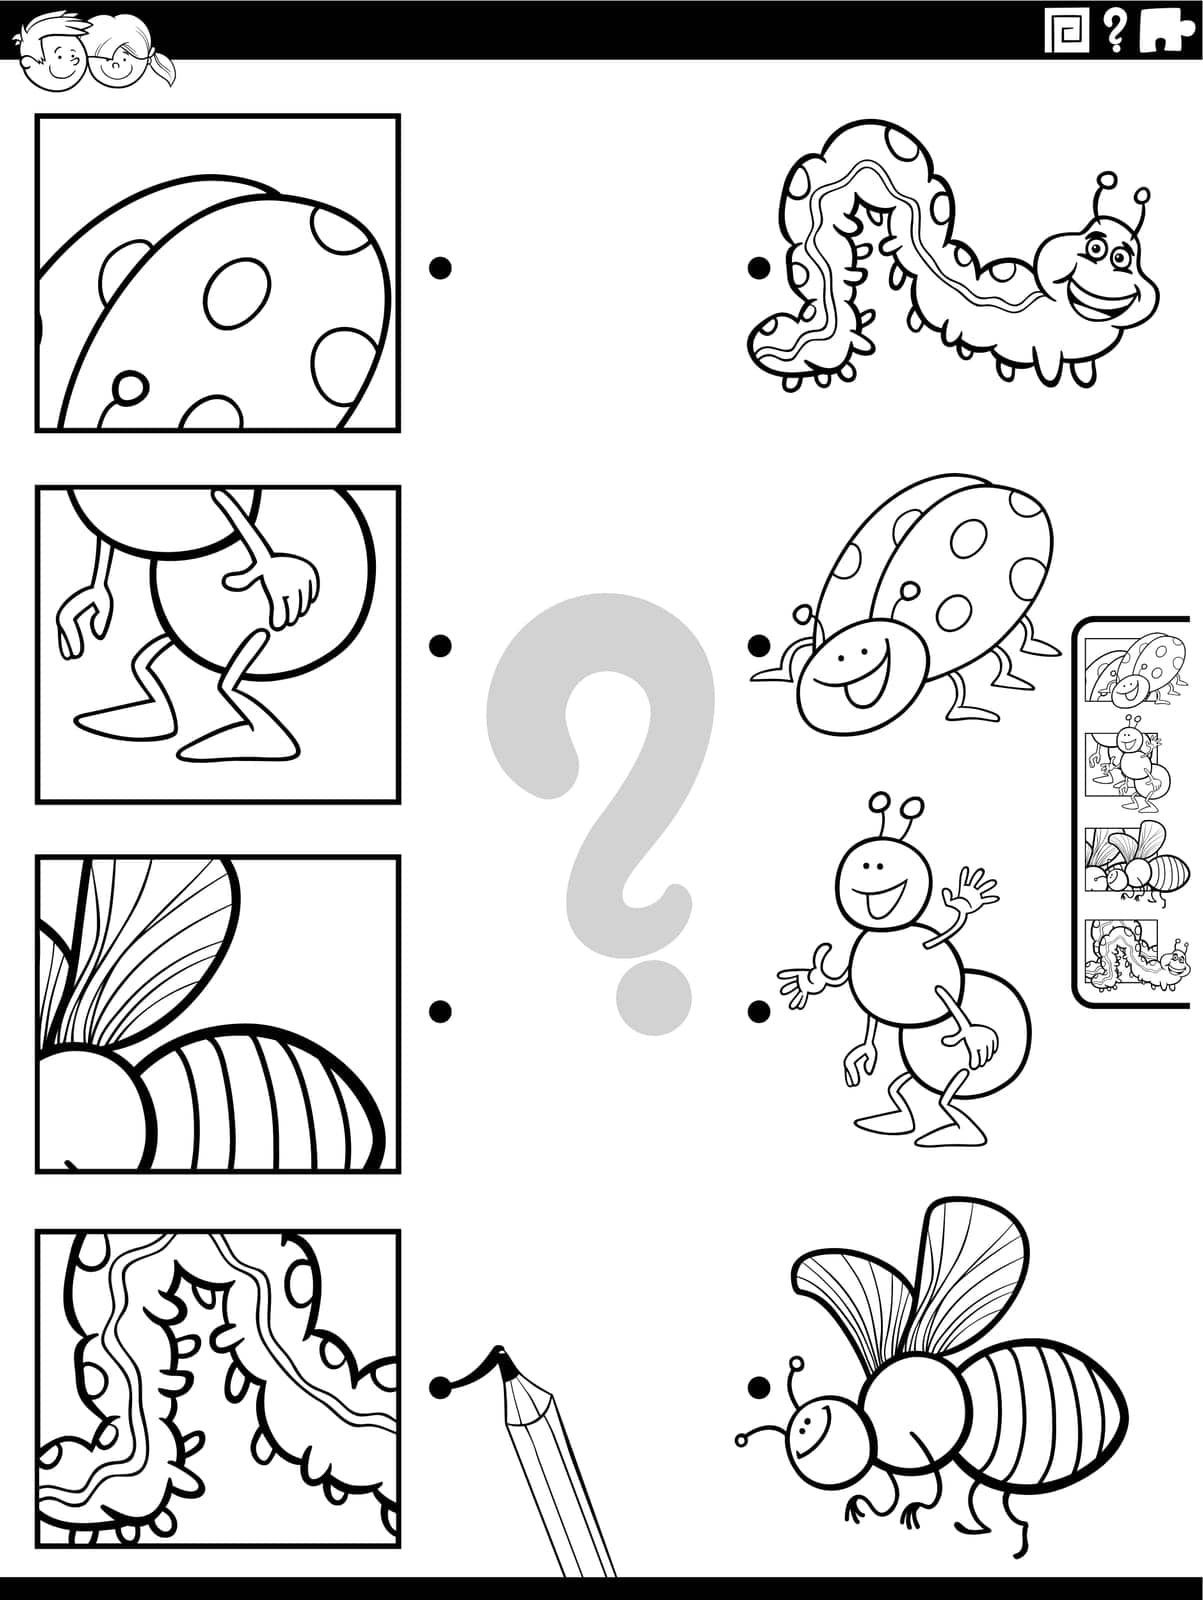 Black and white cartoon illustration of educational matching game with insects animal characters and pictures clippings coloring page